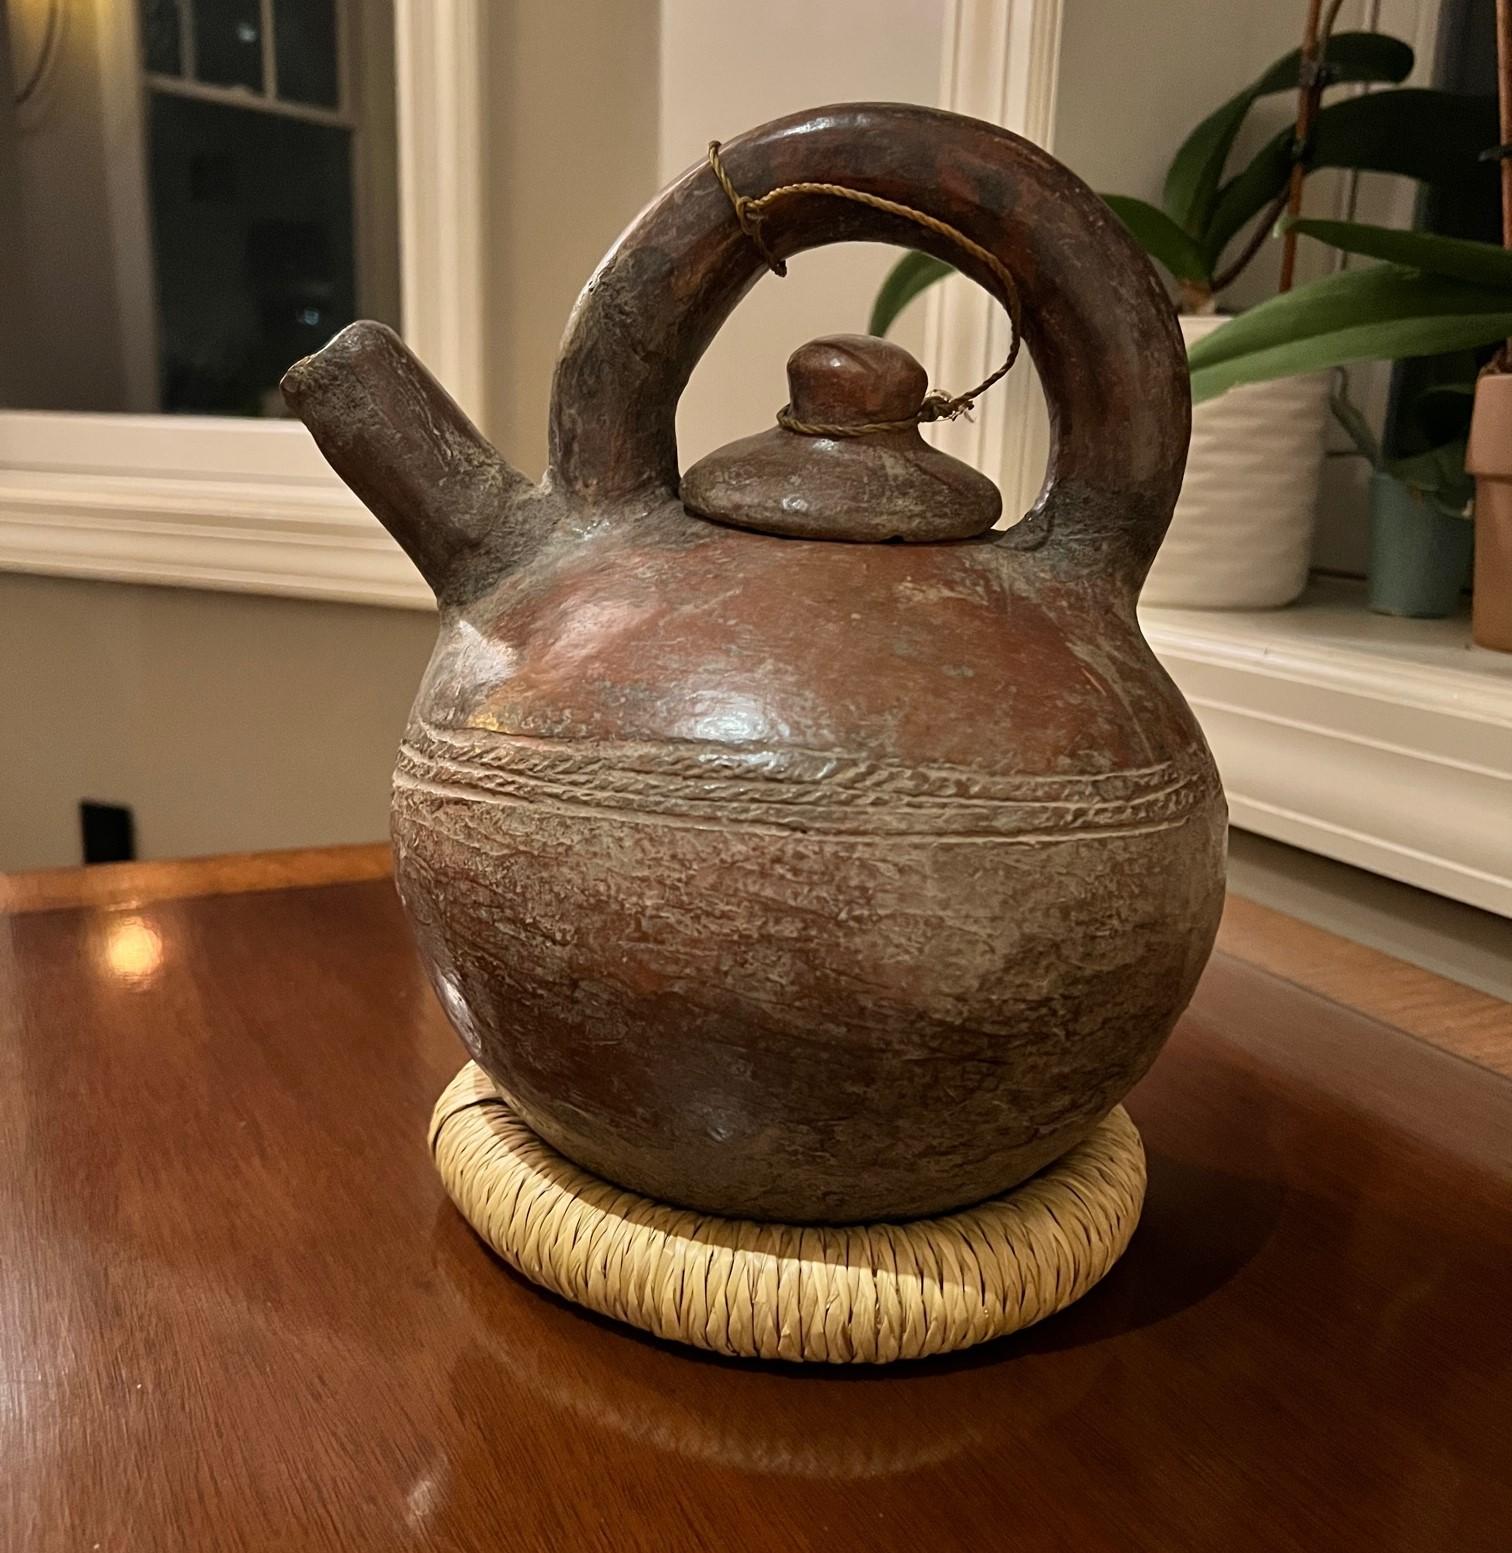 Early 20th Century fired clay water pot with lid from the Gurunsi peoples of Burkina Faso. Shaped much like a teapot, this lidded water pot is beautifully crafted with a band of surface decoration showing attention to pattern and texture, Ceramics